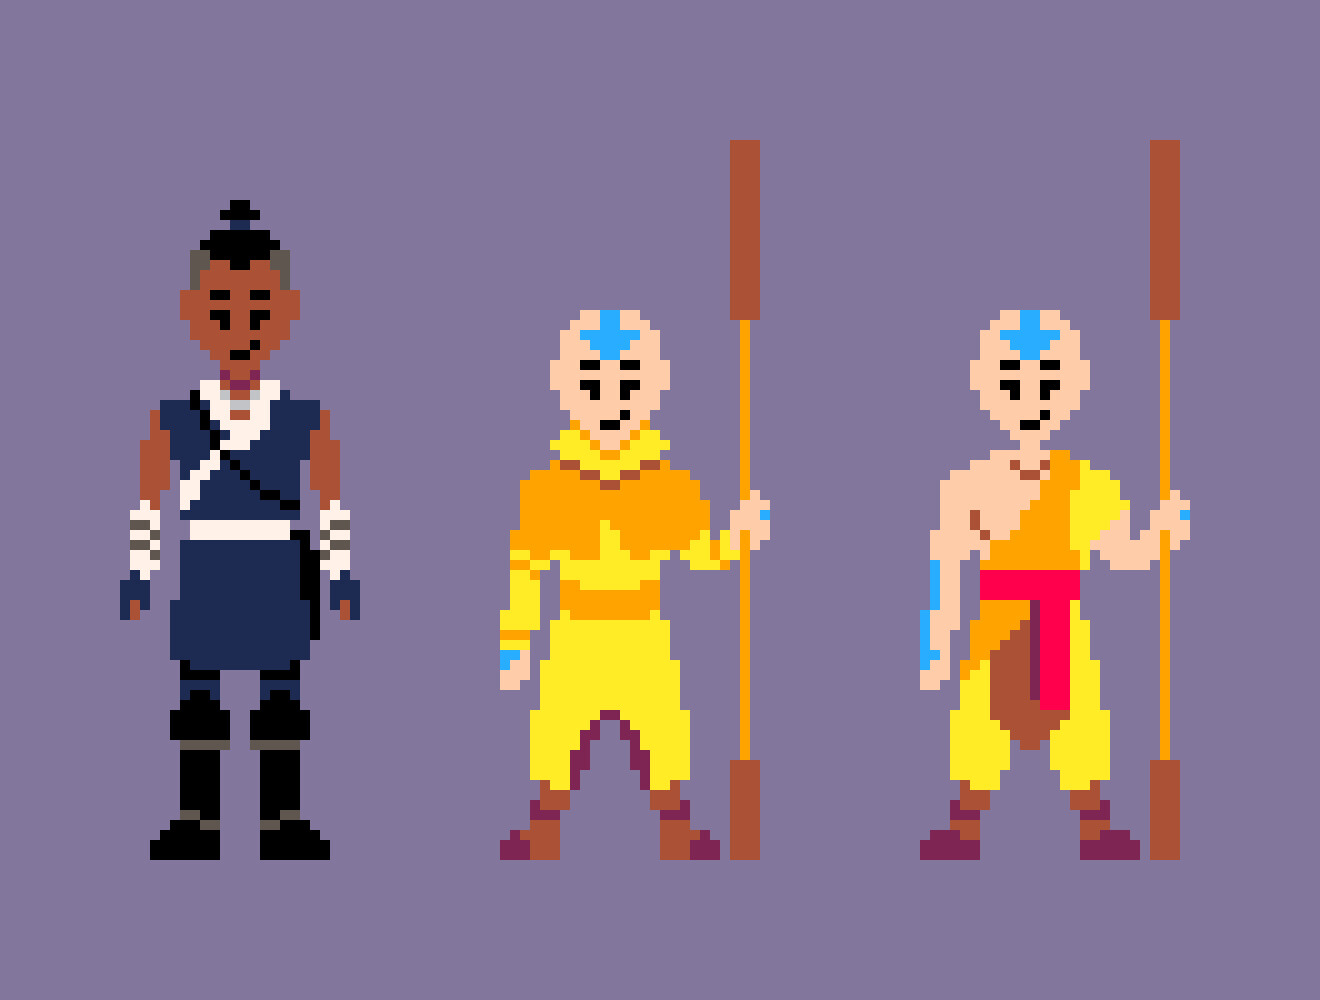 People in Medieval Avatar Icons Pixel Art by 2D Game Assets on Dribbble